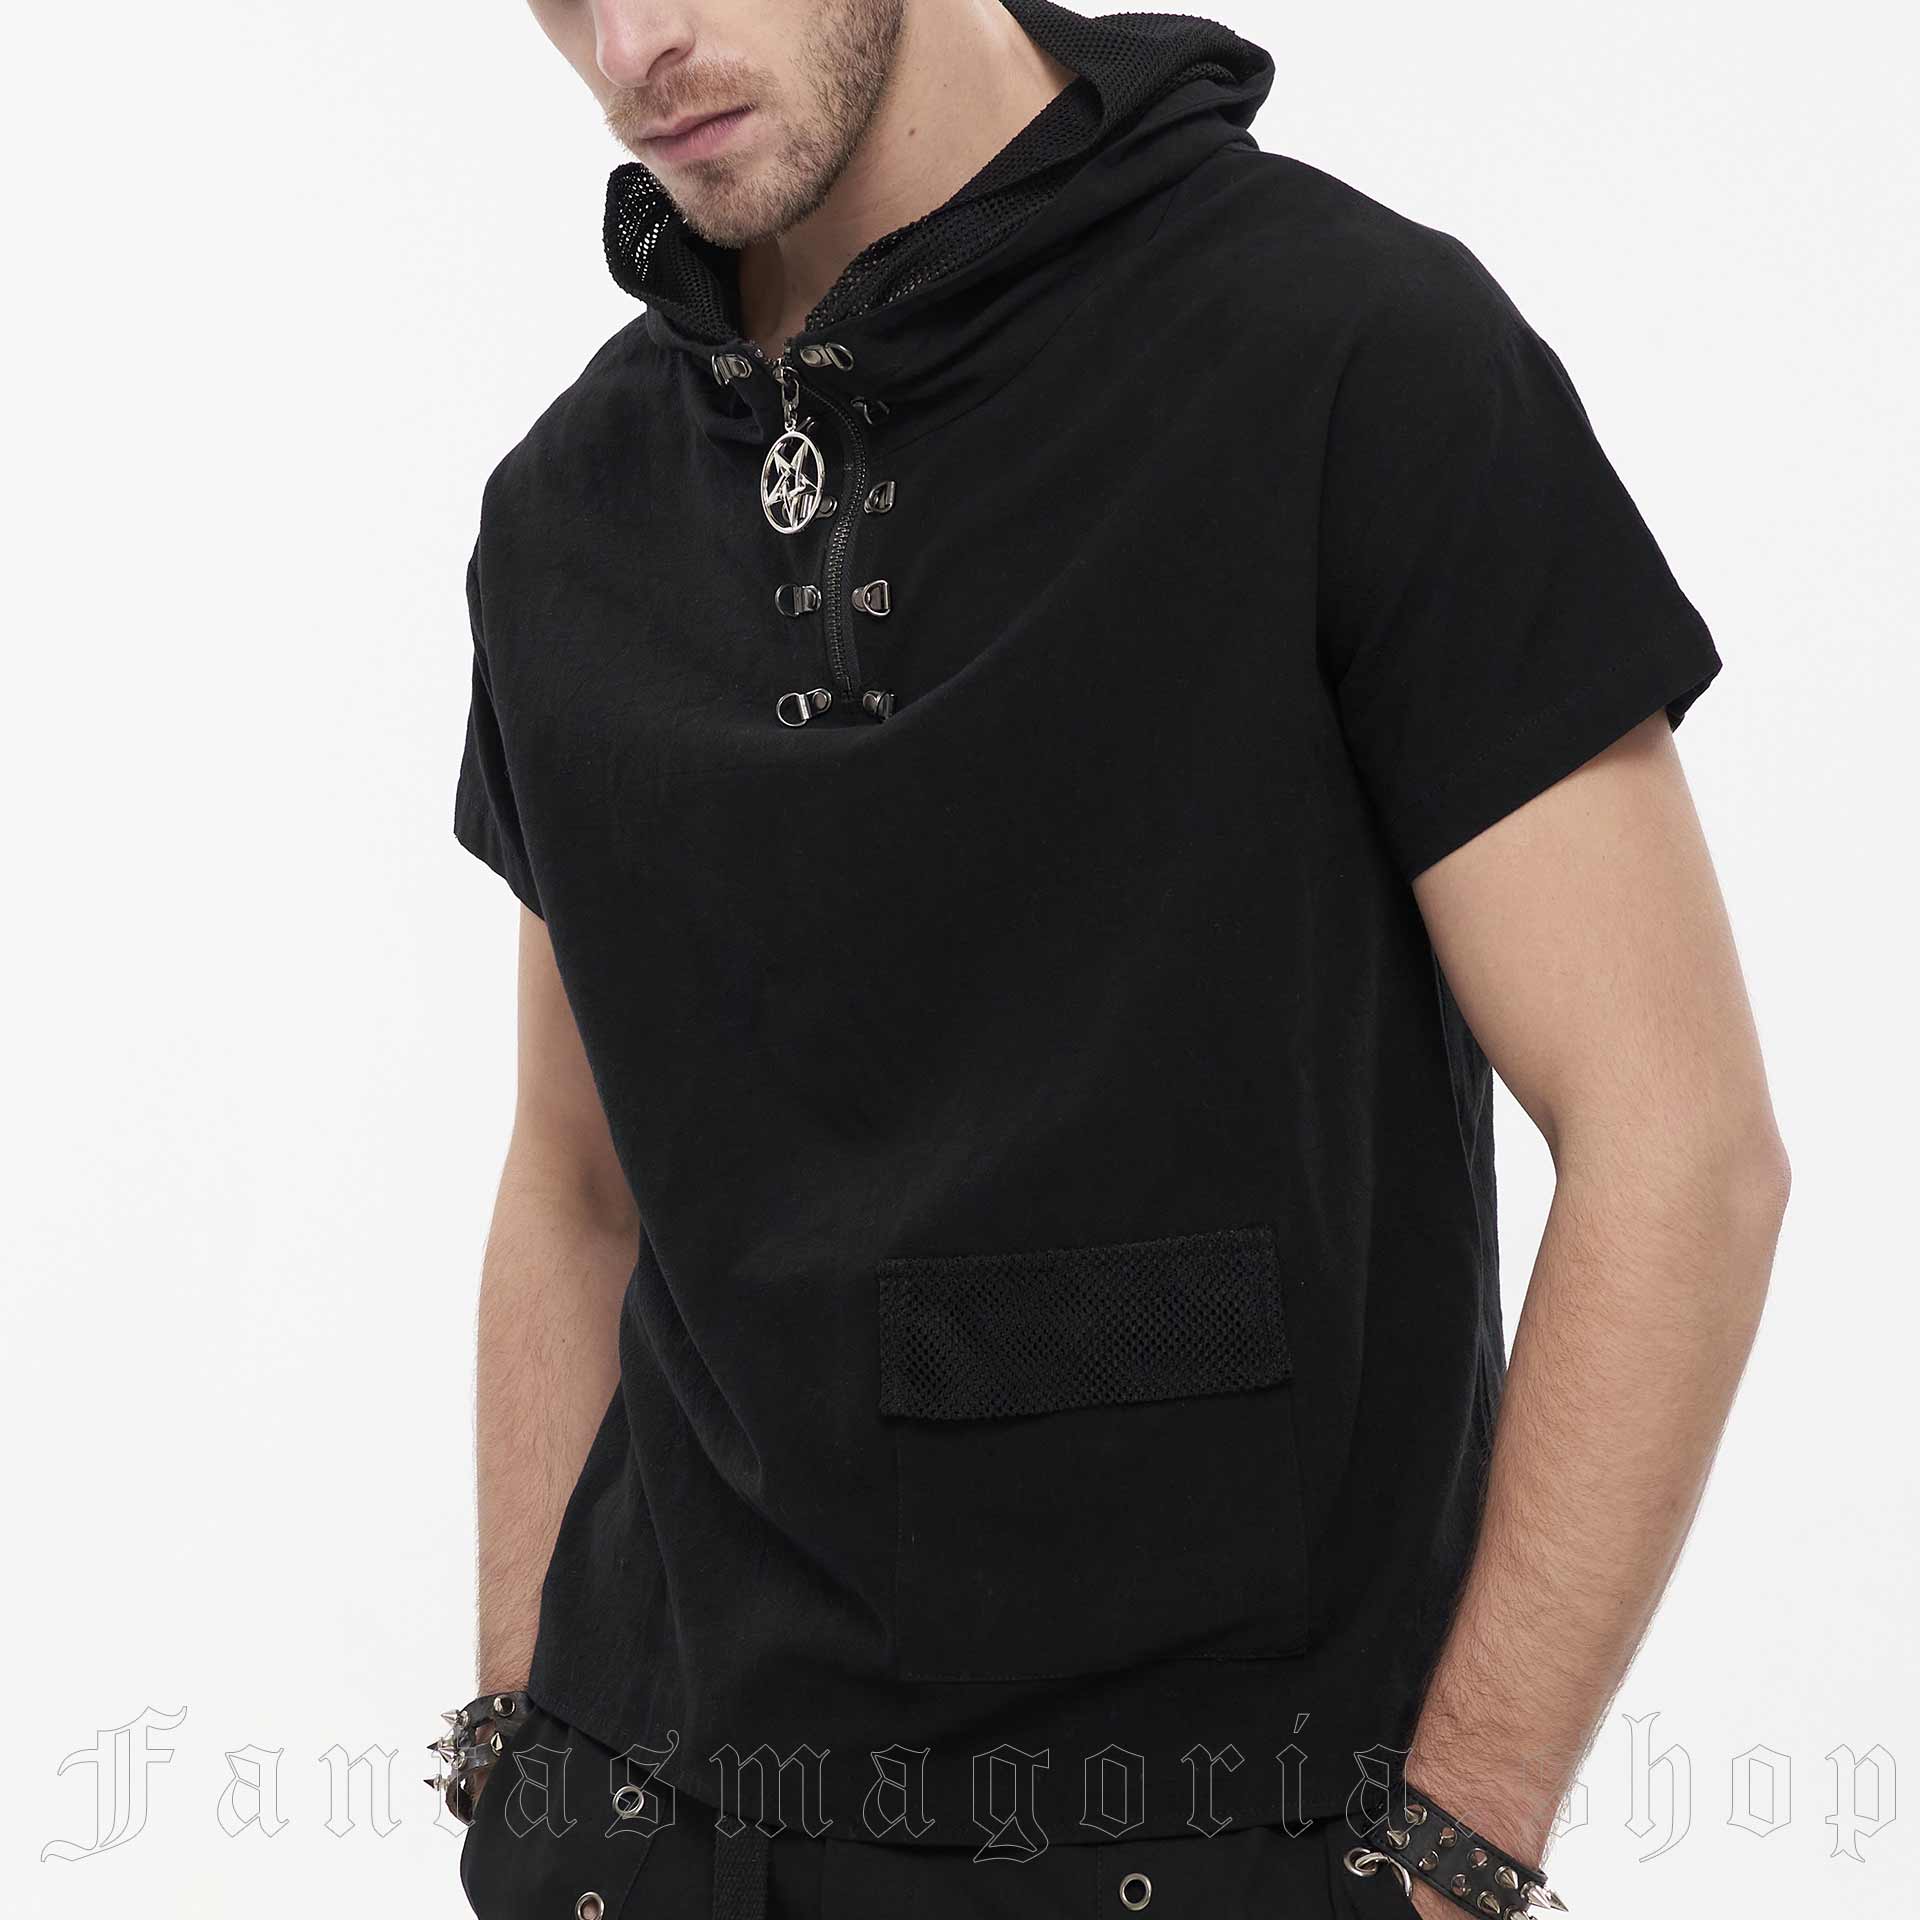 X-Factor Top by Devil Fashion brand